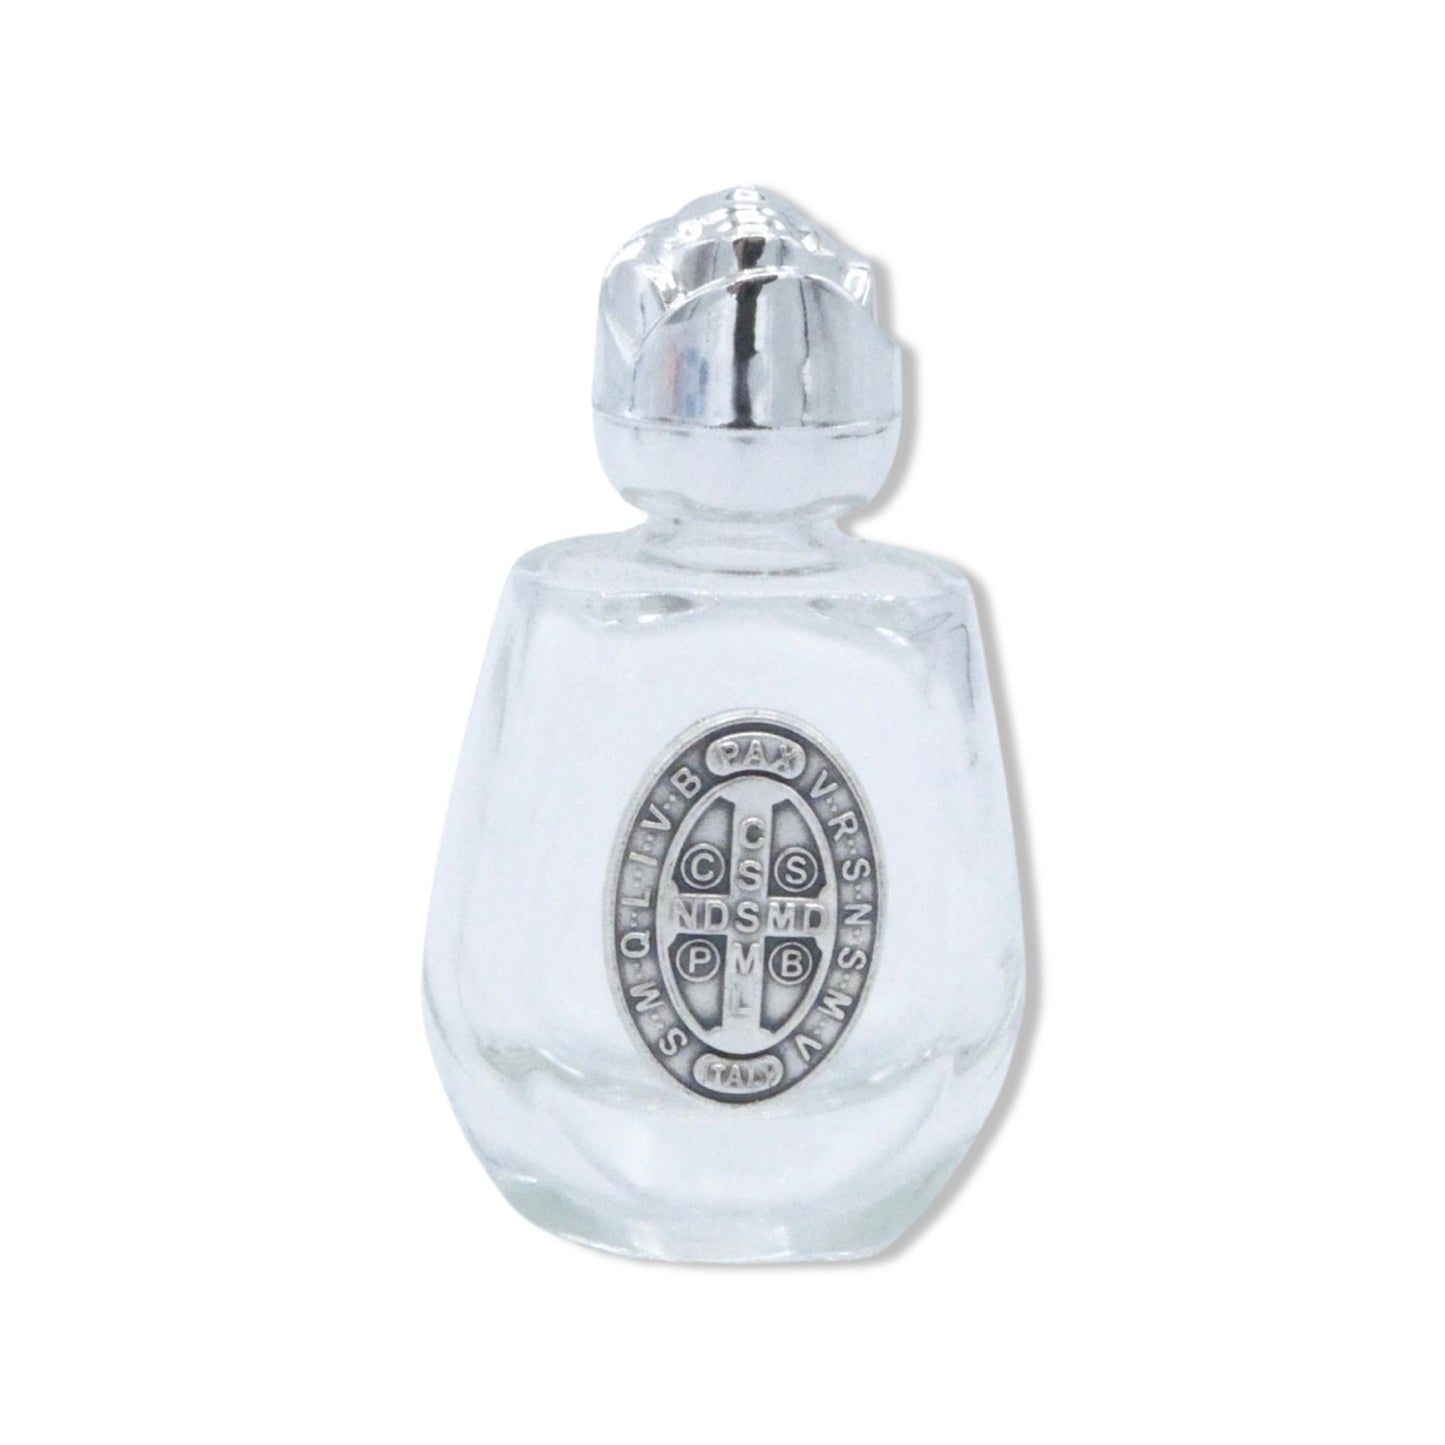 St. Benedict Holy Water Bottle